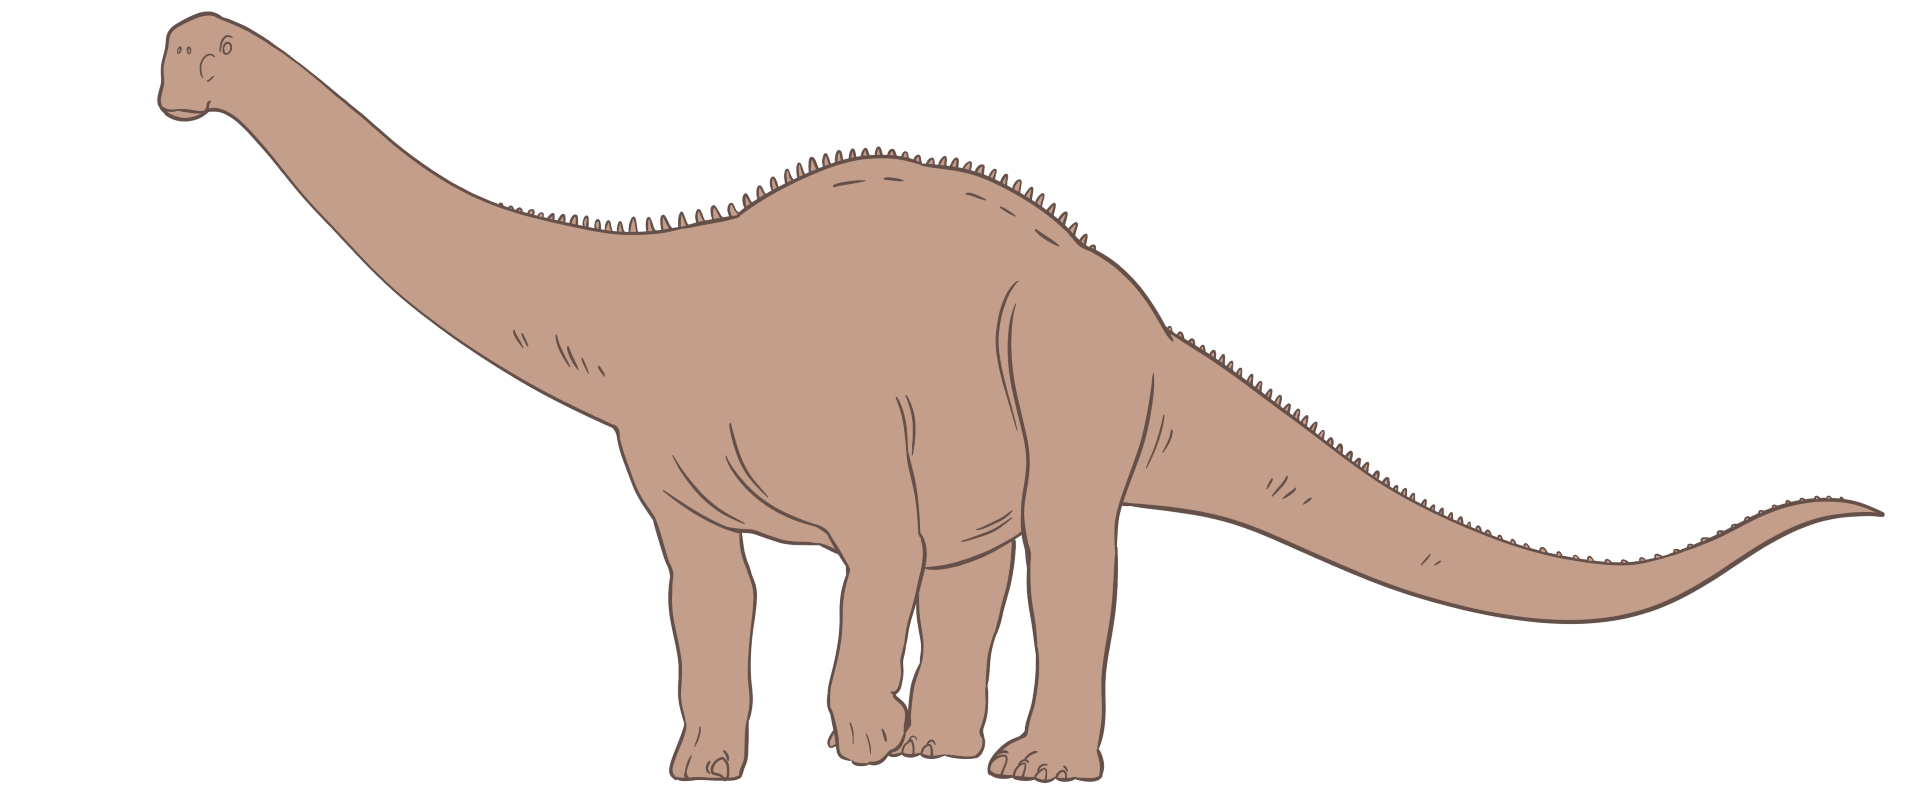 A drawing of a sauropod dinosaur, with a long neck, long tail, and four pillar-like legs supporting its body.